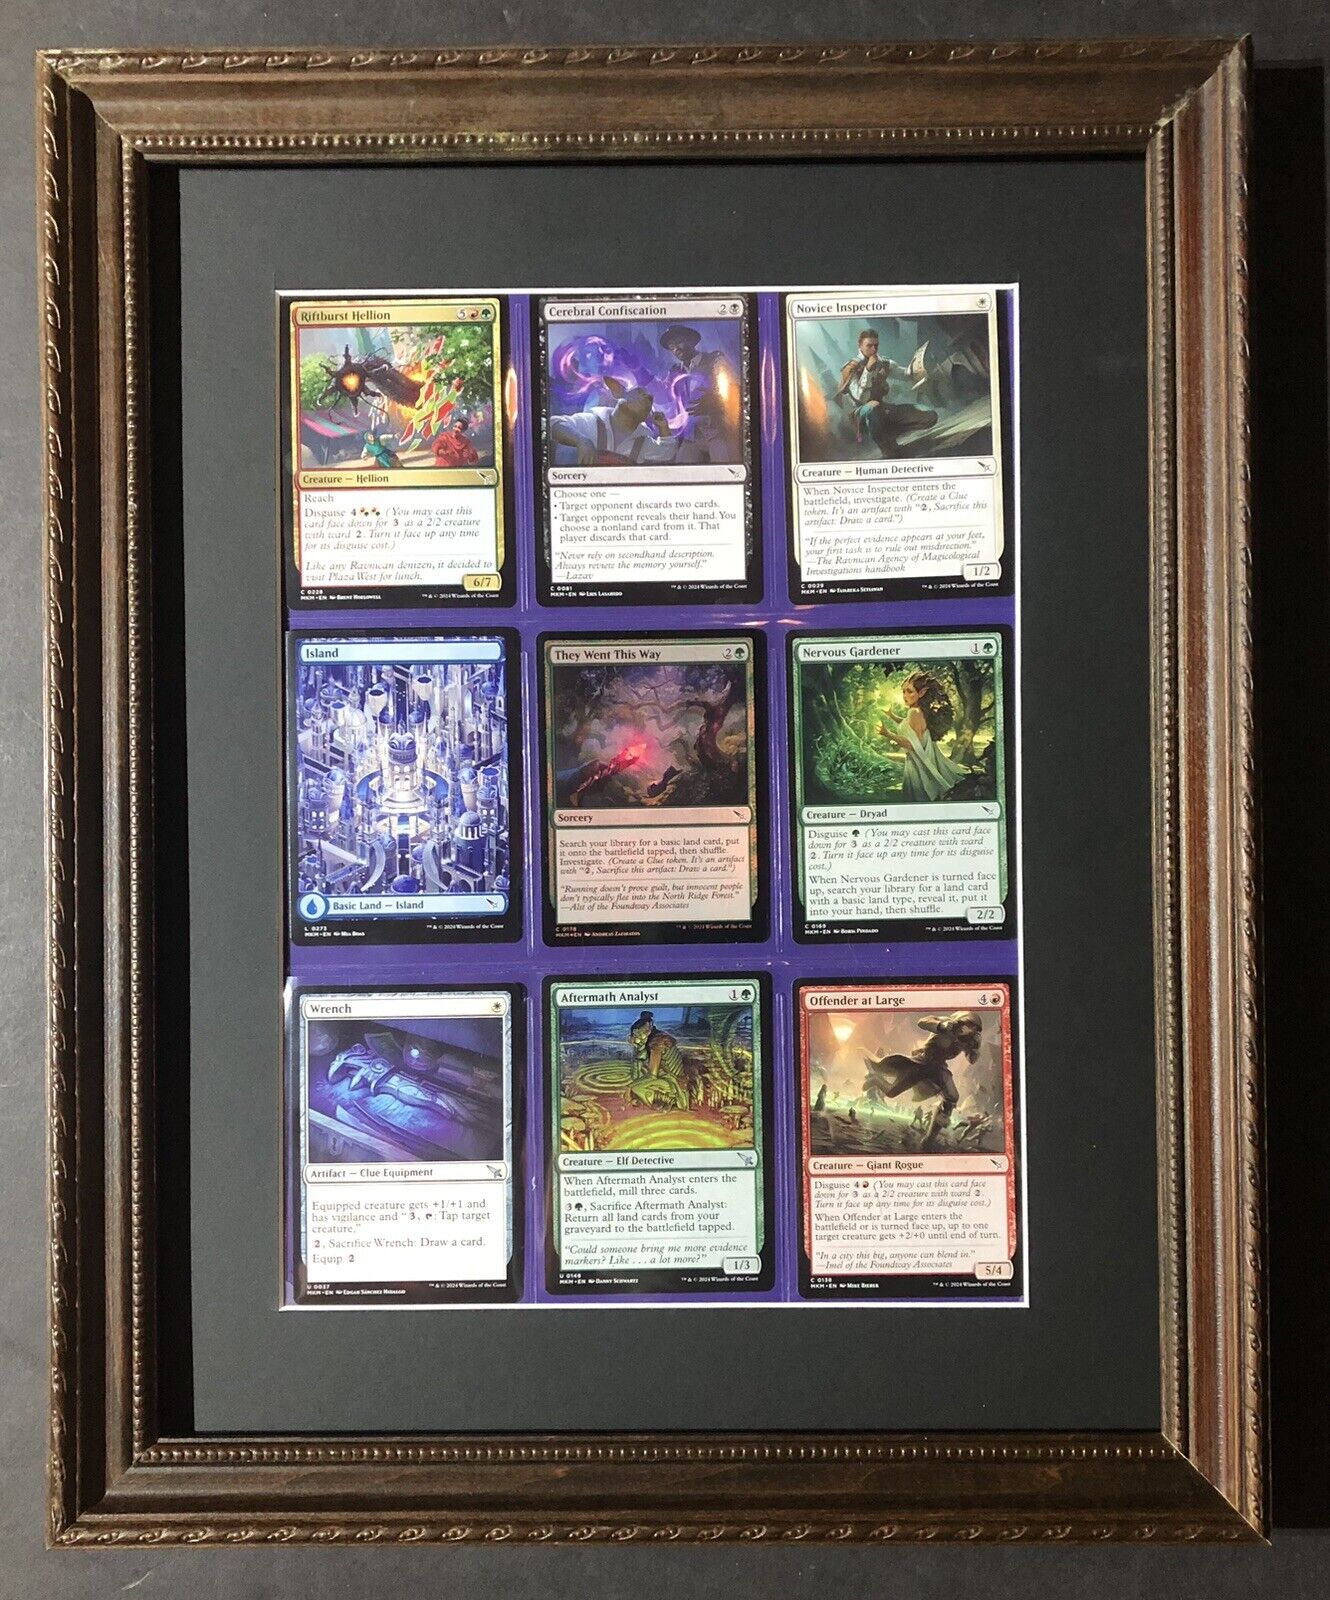 MTG Magic The Gathering Frameable Trading Card Game Decor Wall Art Collage Gift